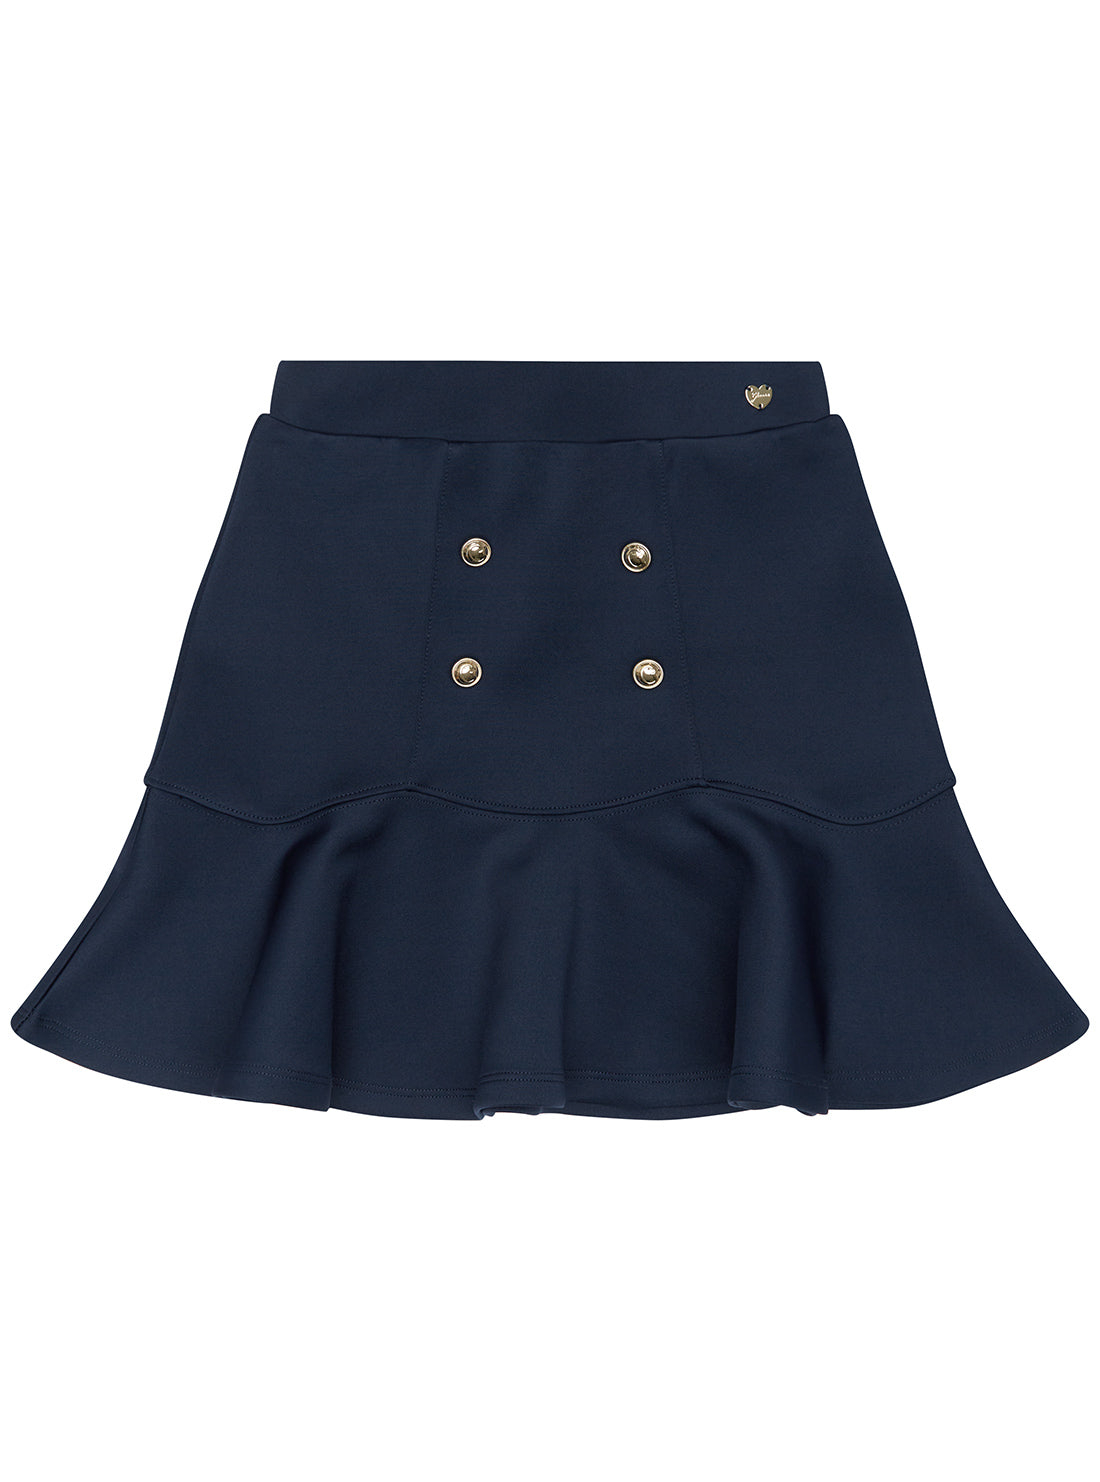 GUESS Navy Stretch Scuba Midi Skirt (2-7) front view